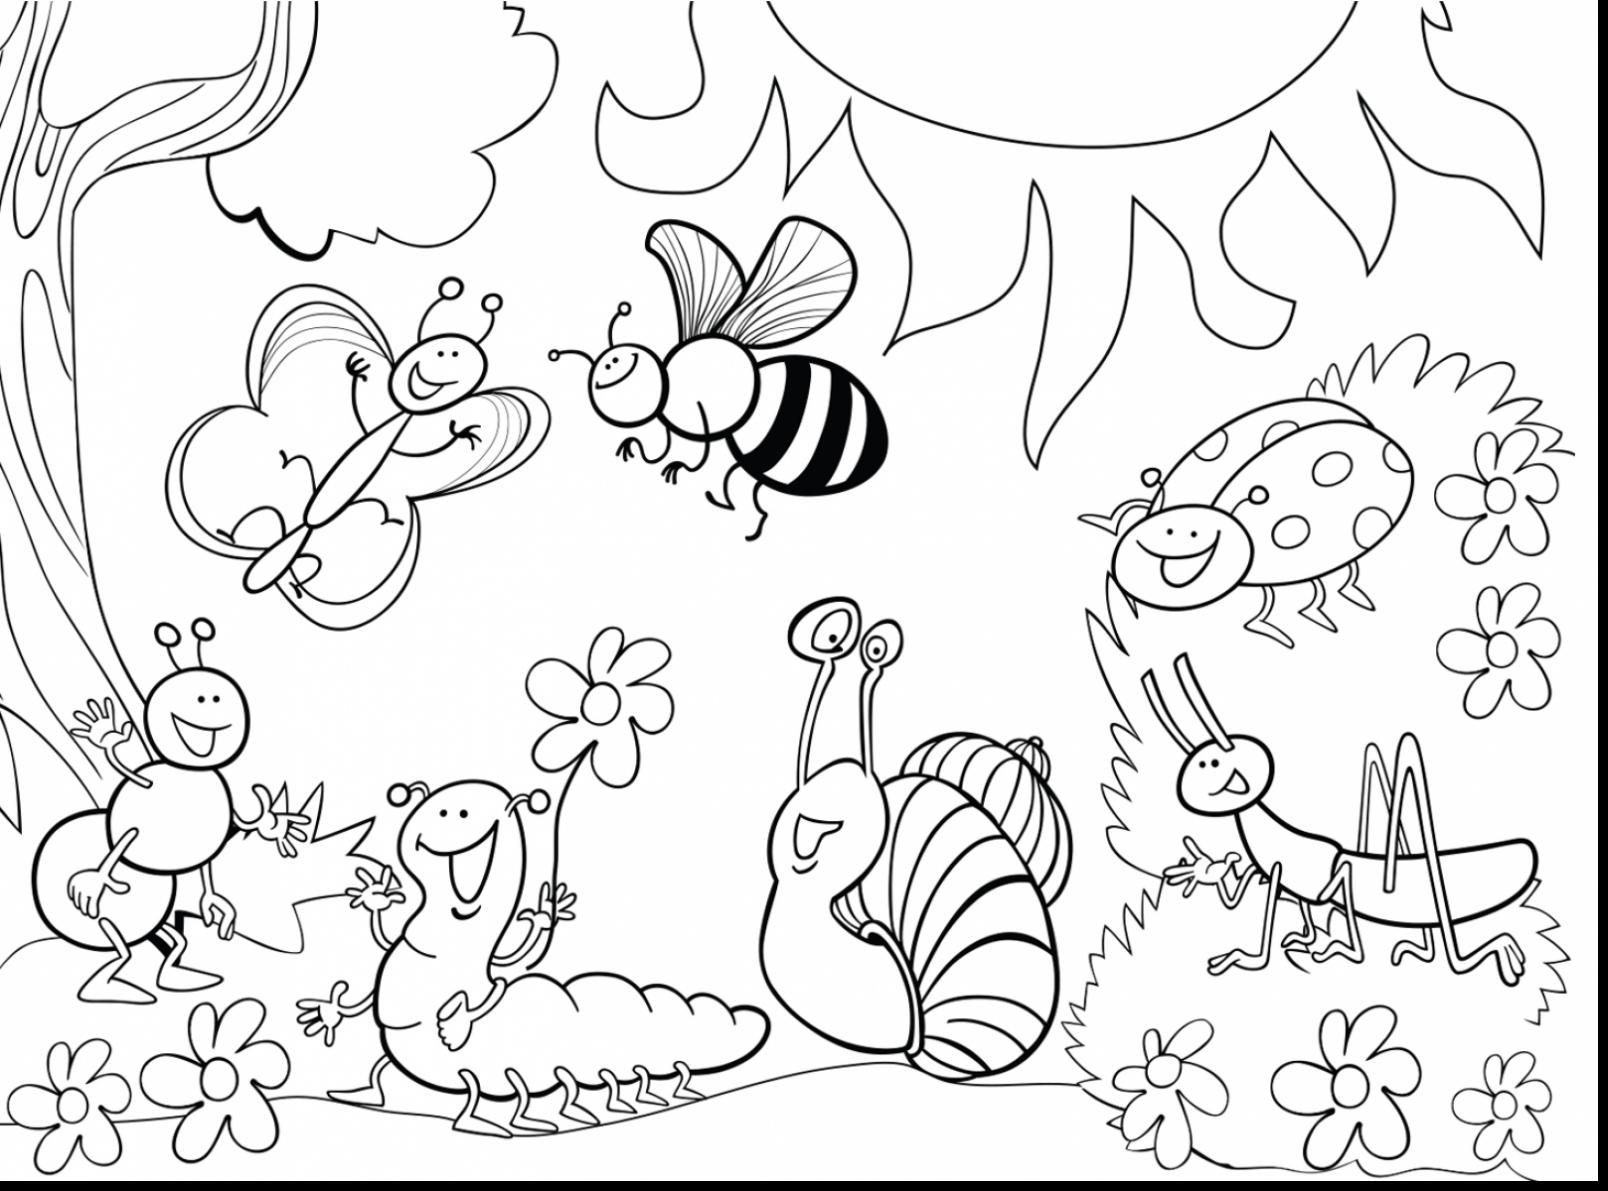 Printable Bug Coloring Pages
 Bug Coloring Pages Bugs Print New School ideas